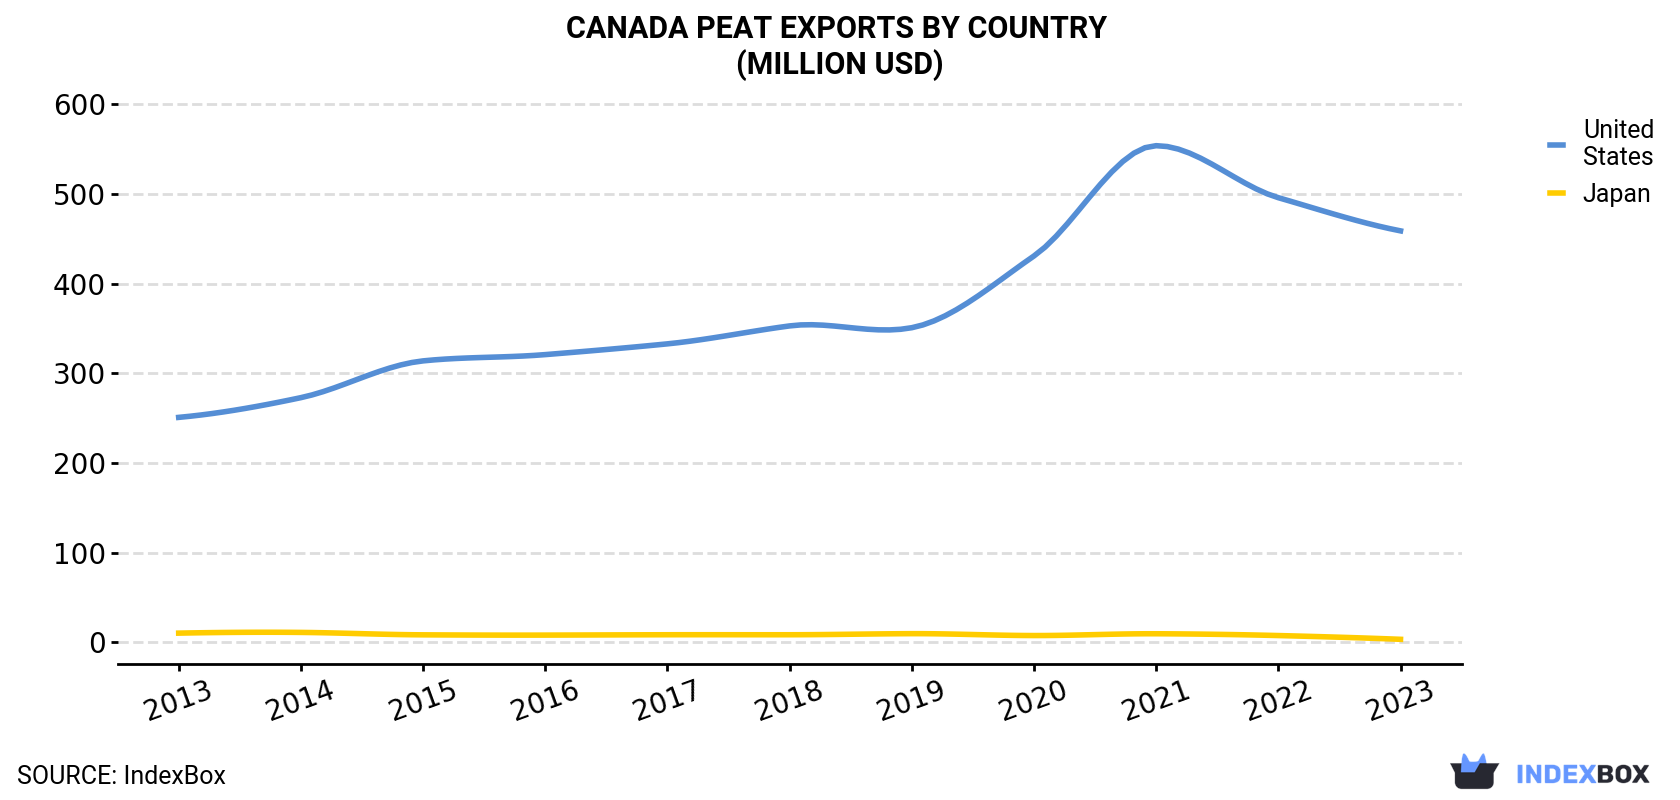 Canada Peat Exports By Country (Million USD)